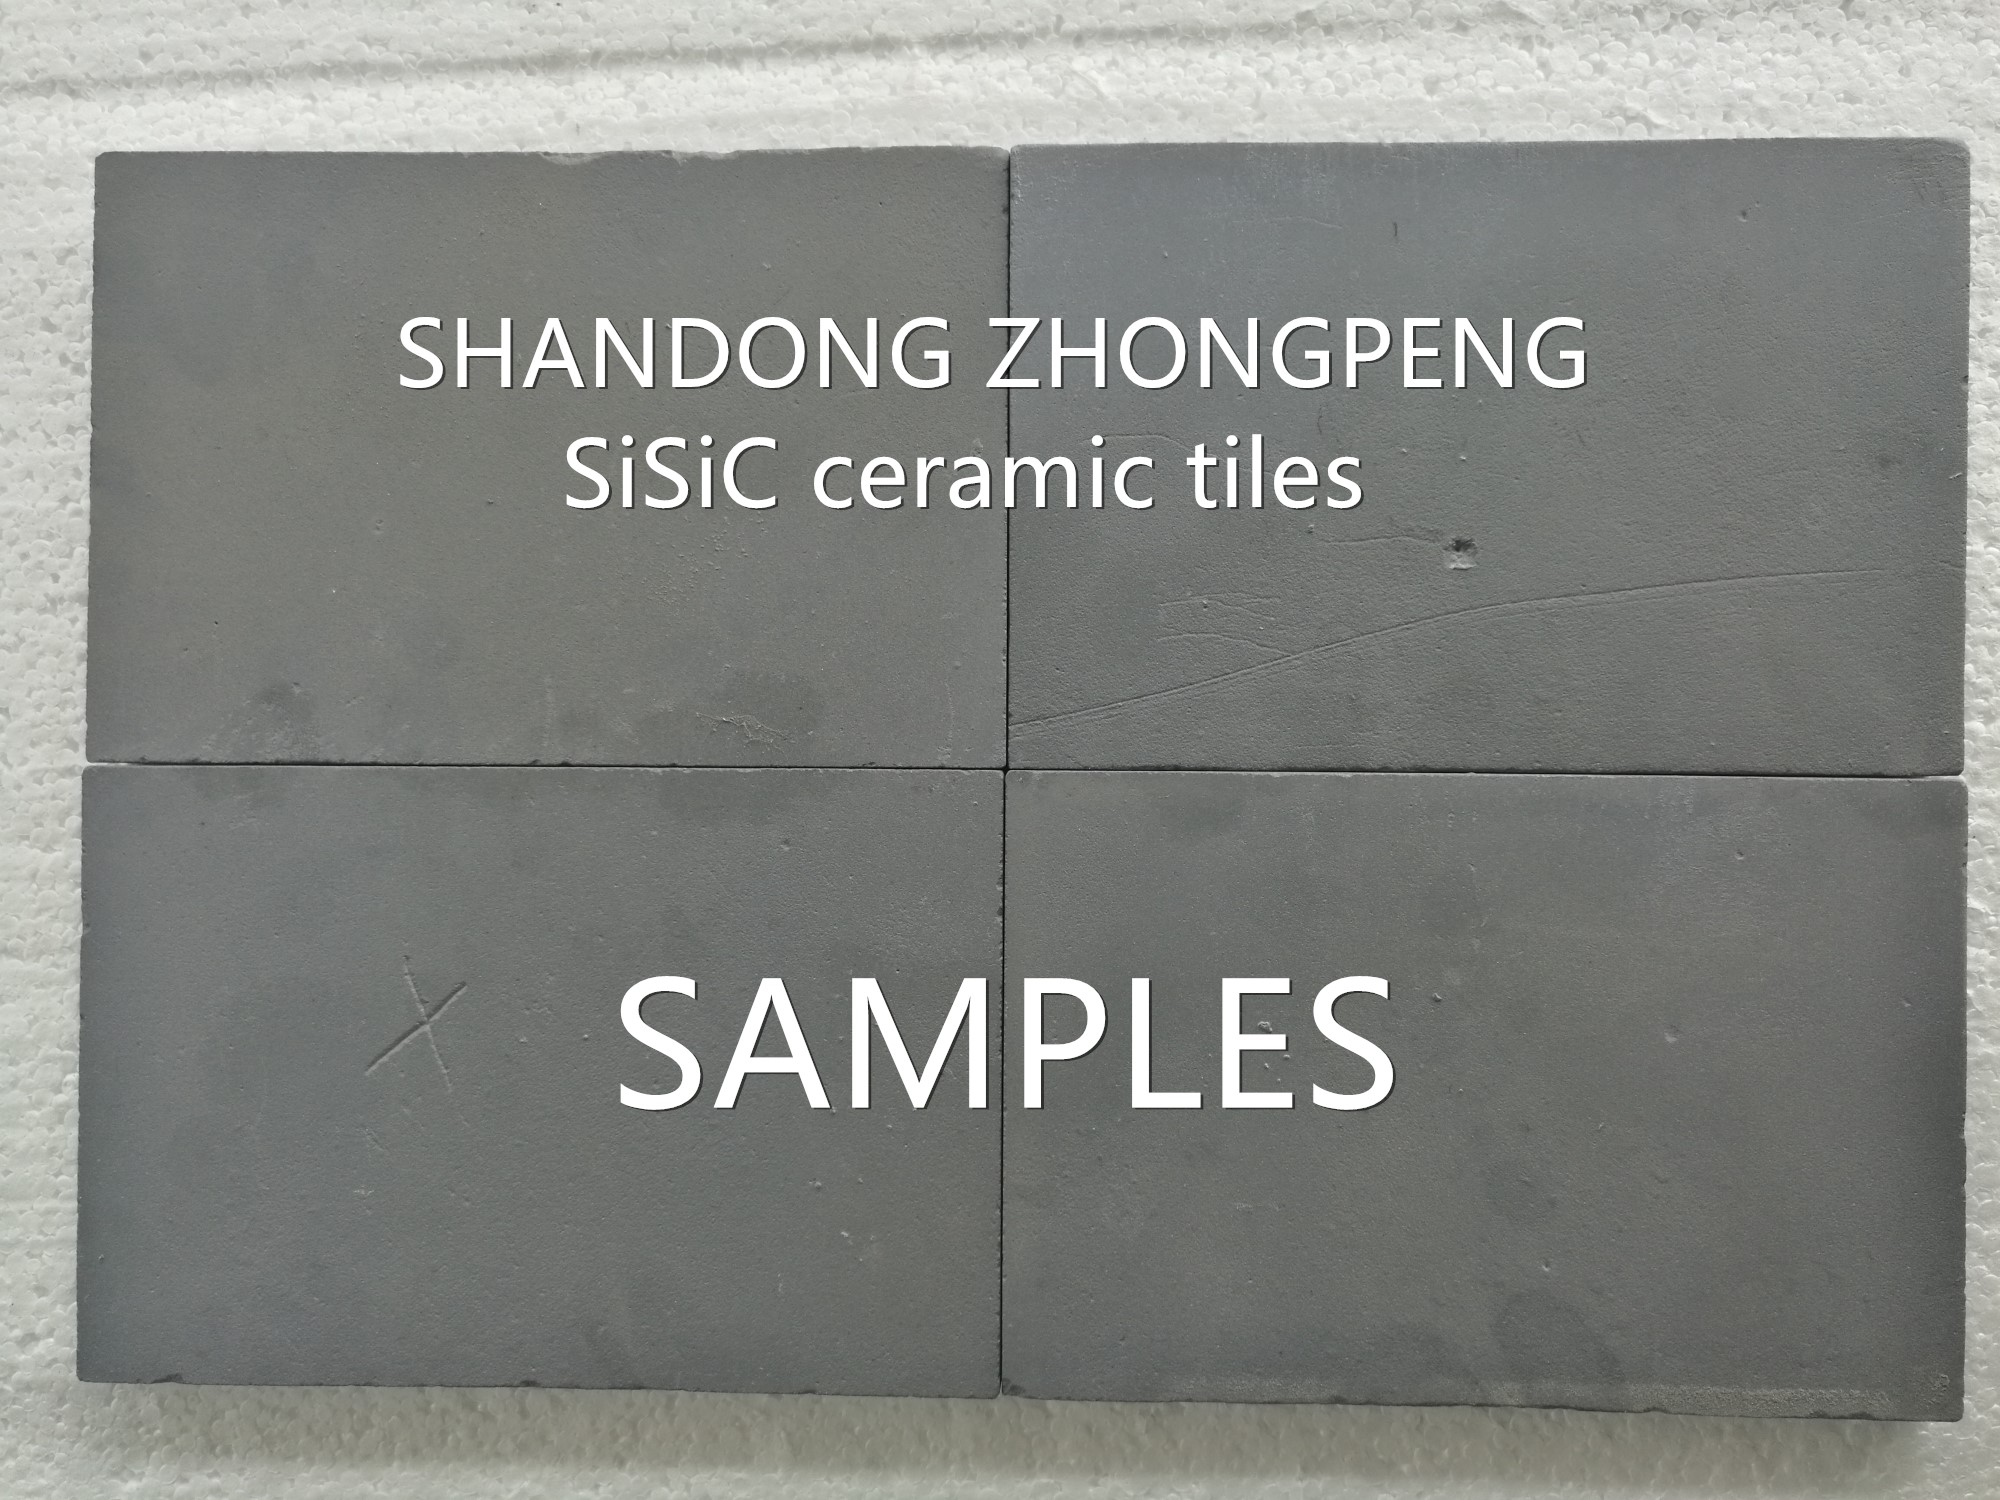 China Factory for Gas Cutting Nozzle Tip -
 [Copy] Wear resistant customized Silicon carbide & Alumina tiles, Ceramic Liner, tiles, plates, blocks, lining, pipes – ZhongPeng